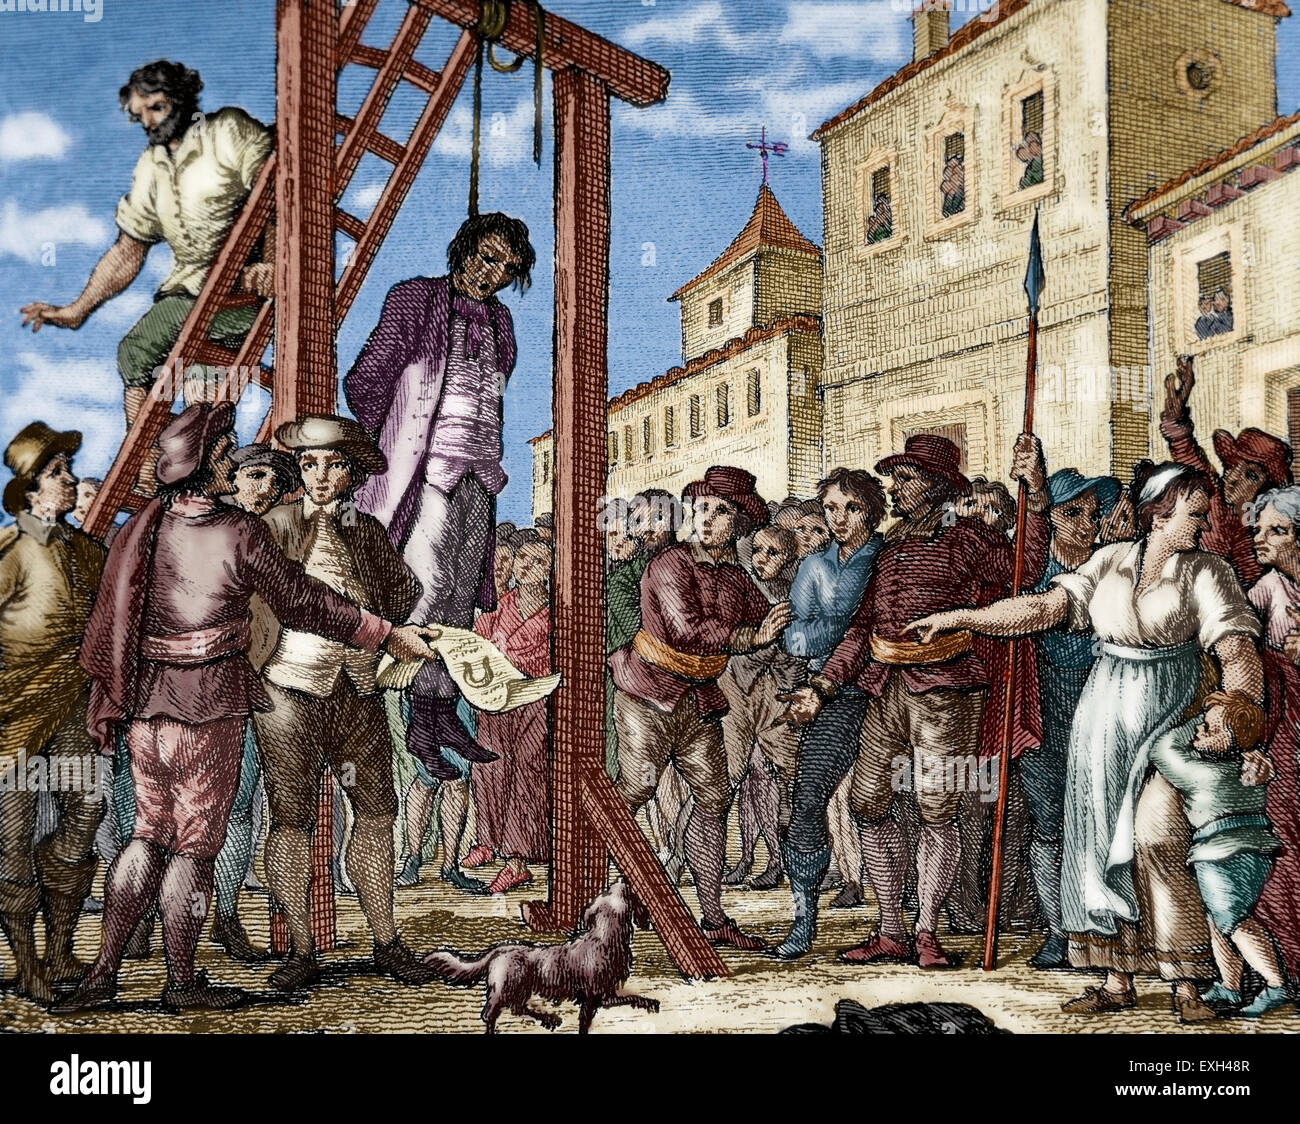 Lesser Antilles. Grenada. French occupation. 17th century. Uprising of the colonists against the tyranny of the governor, sentenced to death by hanging. Engraving, 1807. Colored. Stock Photo